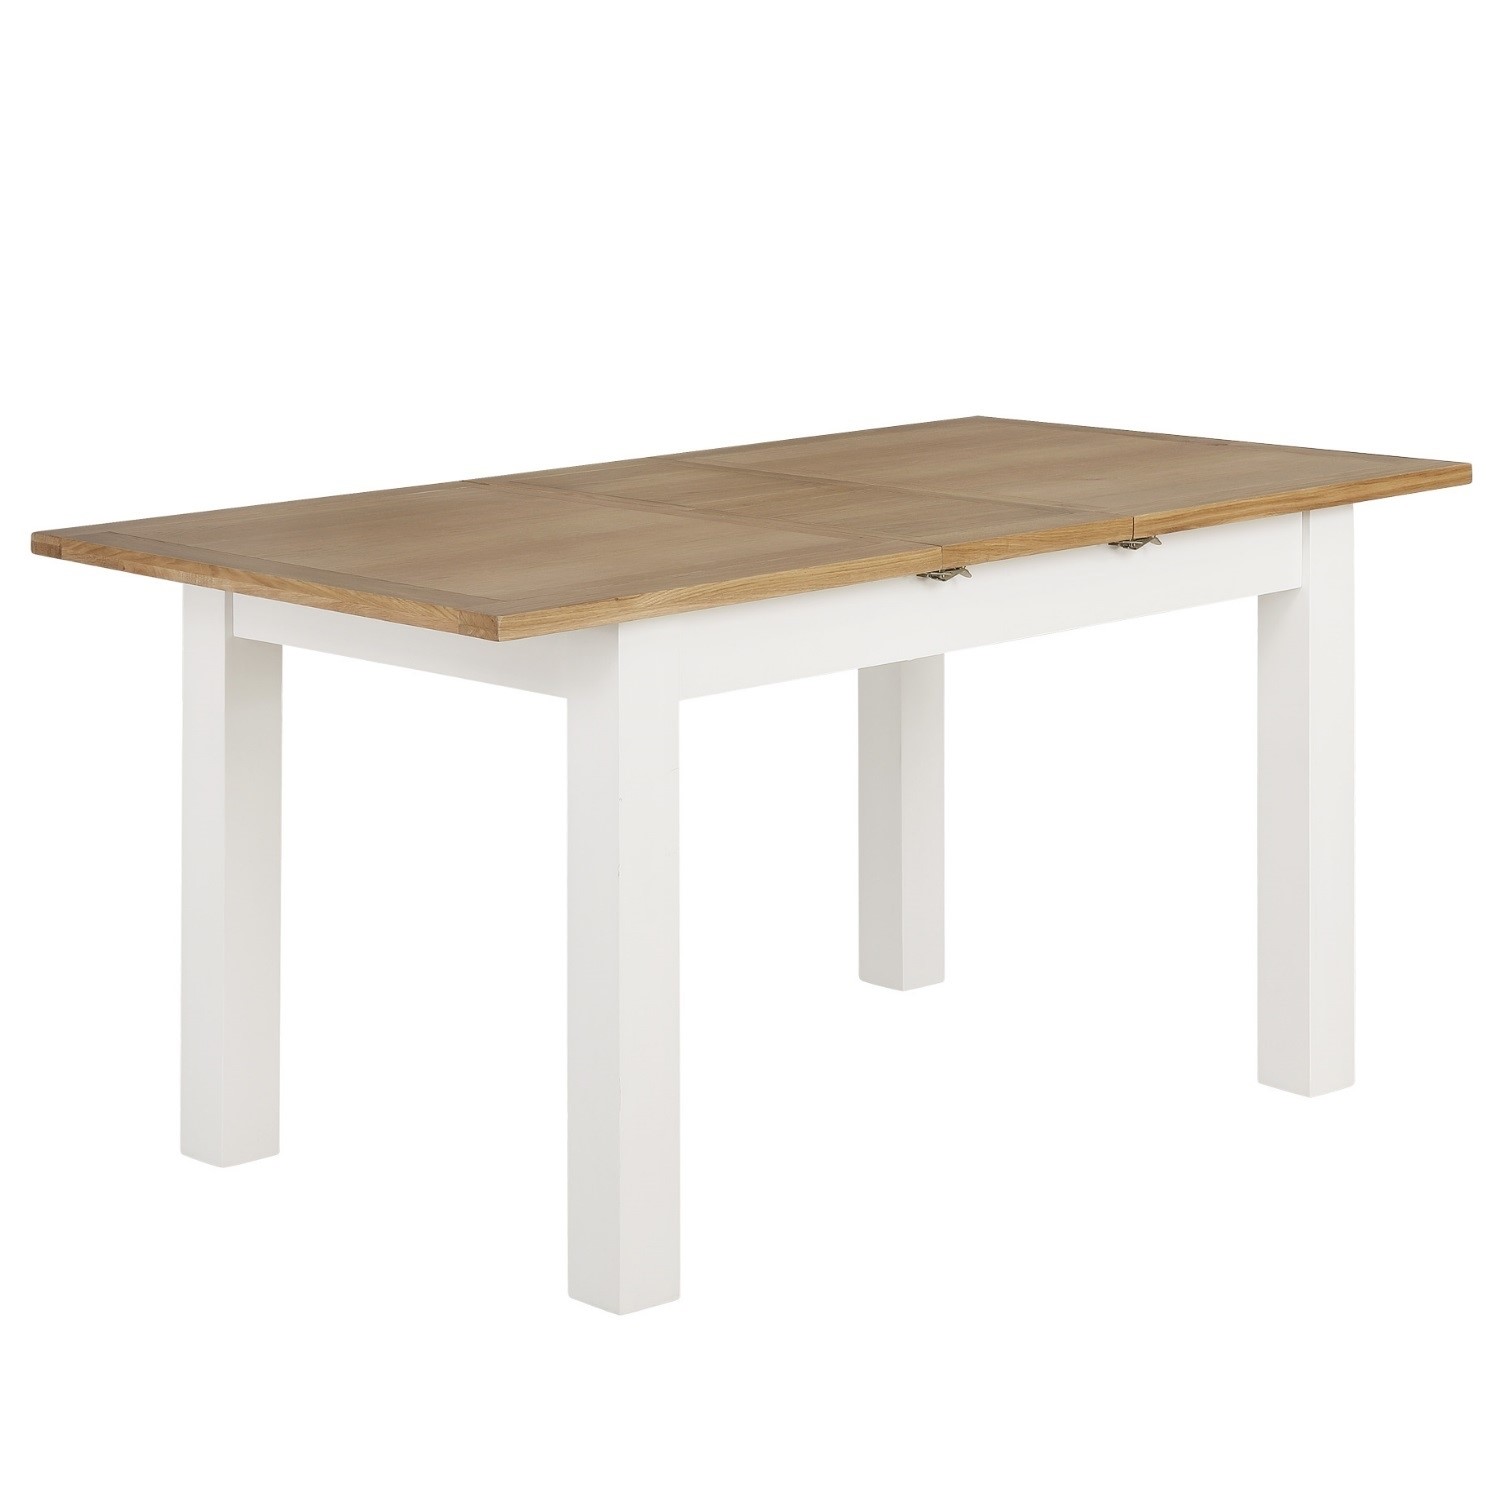 White Extendable Dining Table In Solid Wood With An Oak Top Aylesbury Furniture123